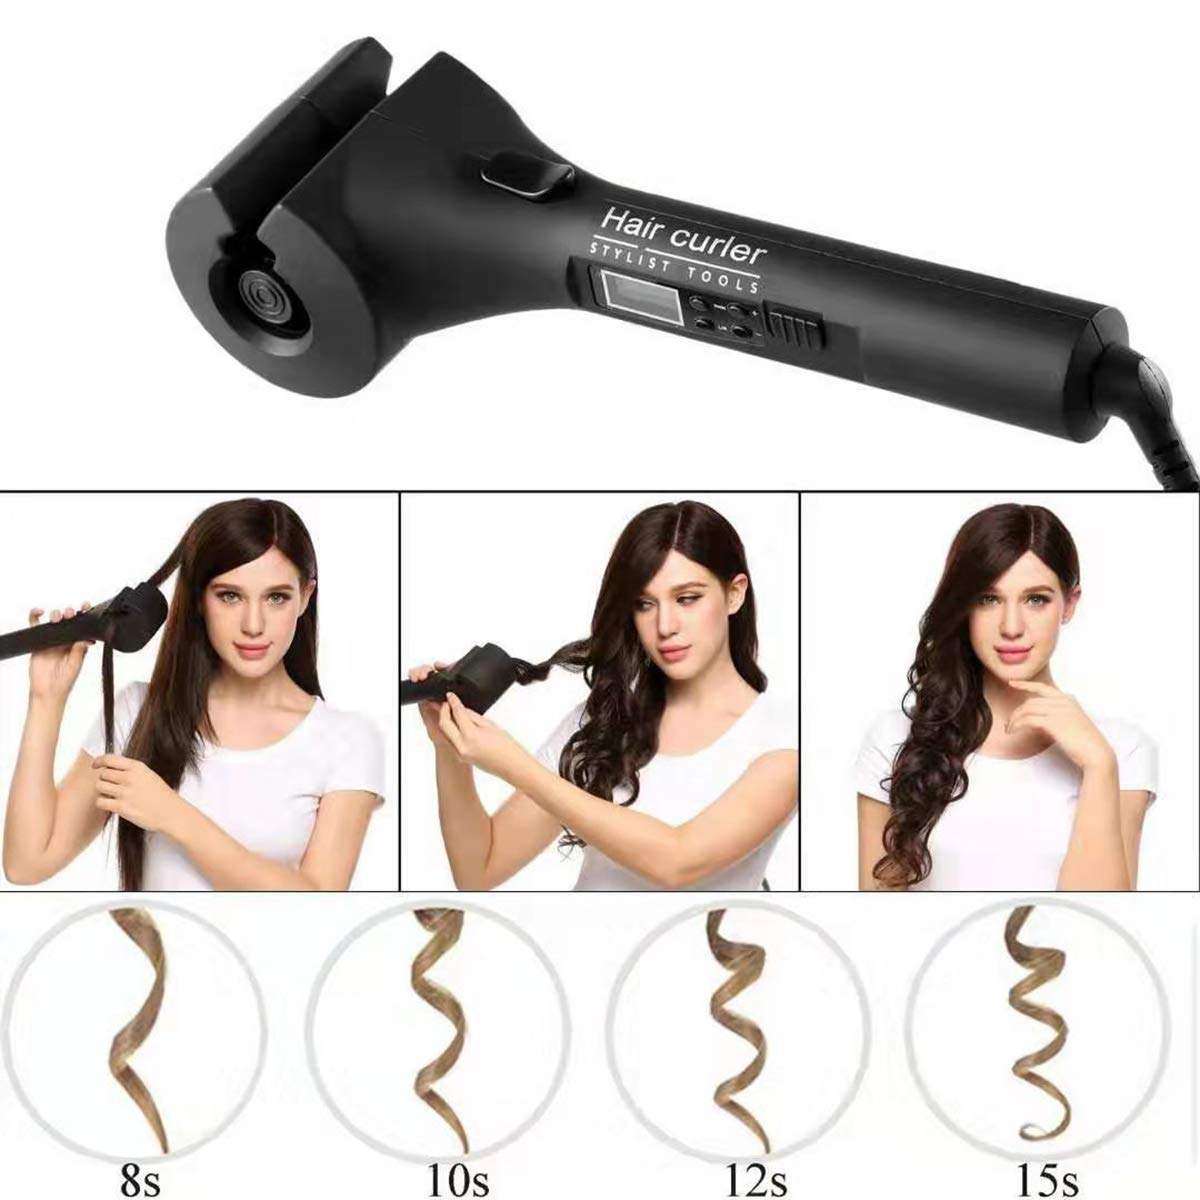 Professional Automatic Hair Curler with LCD display Auto Hair Styling Tools Rollers Hair Curling Iron Black - Home Decor Gifts and More